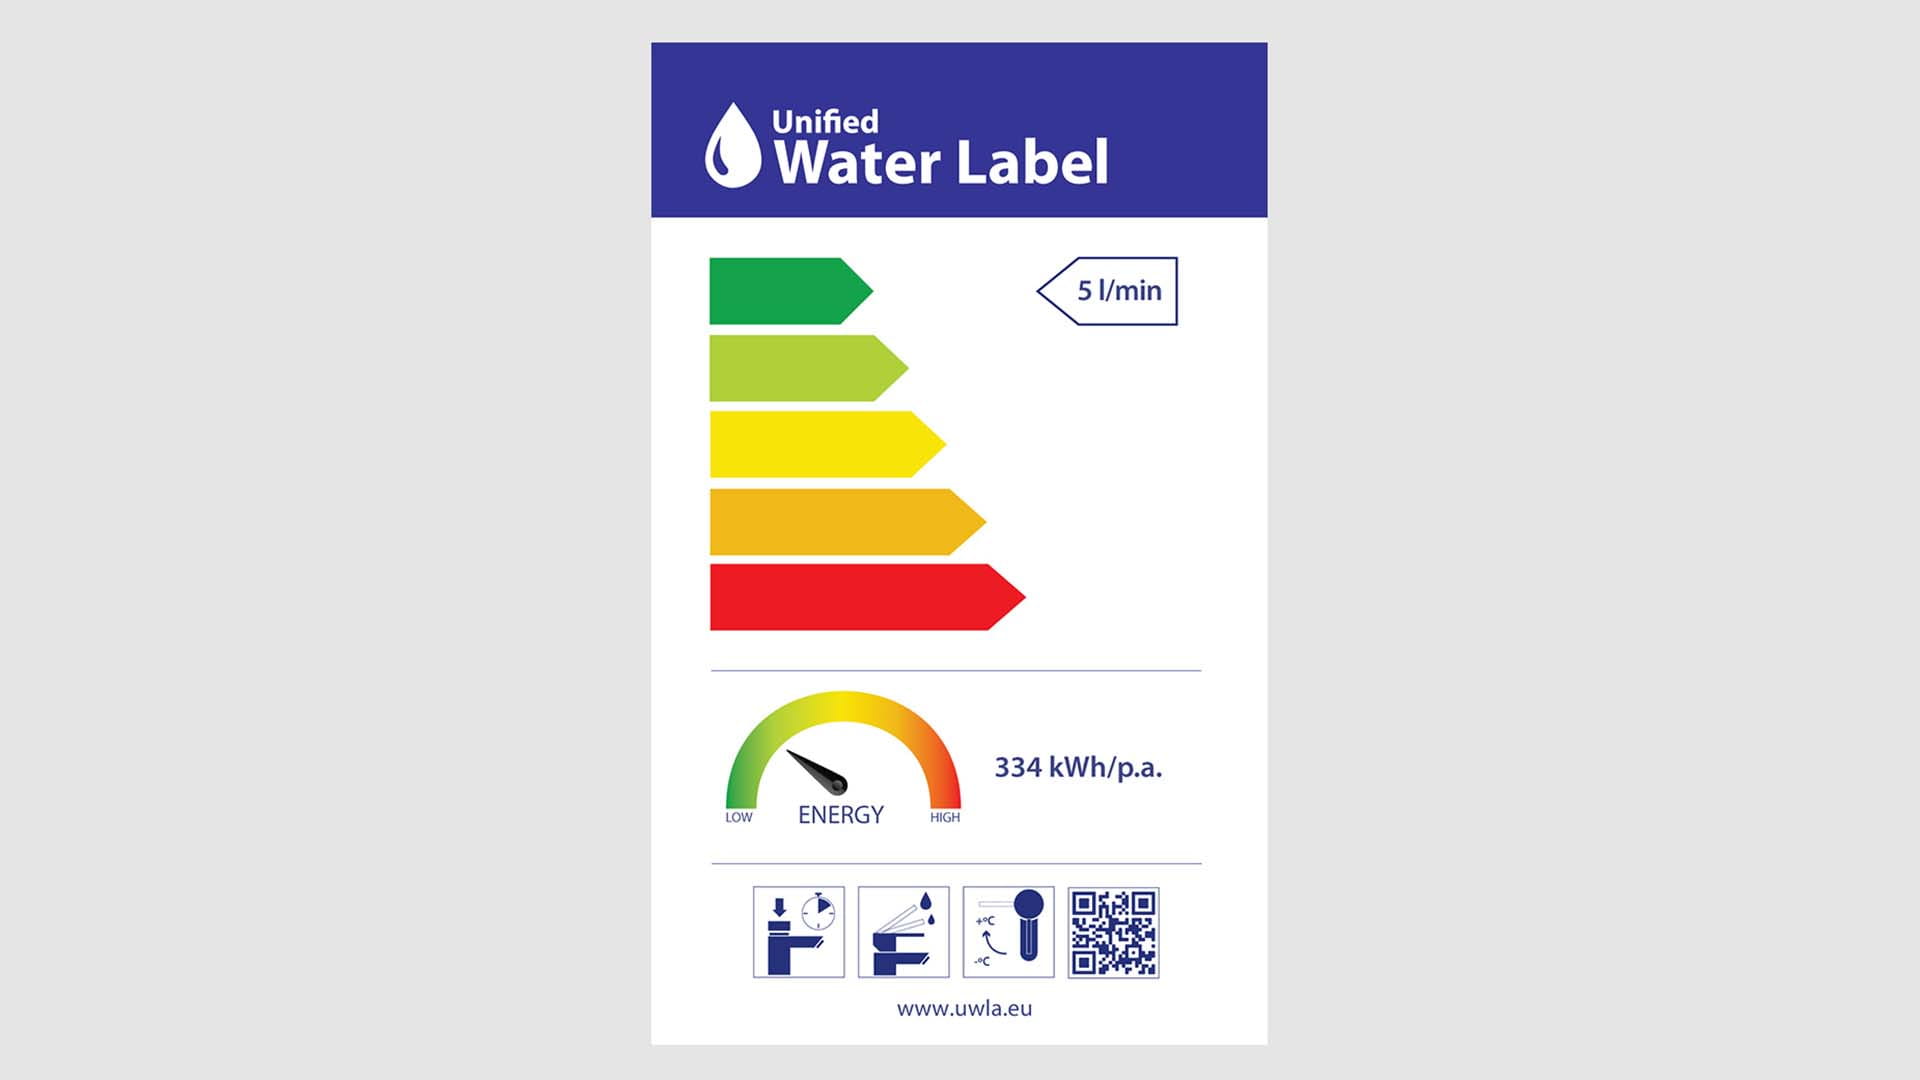 A water label